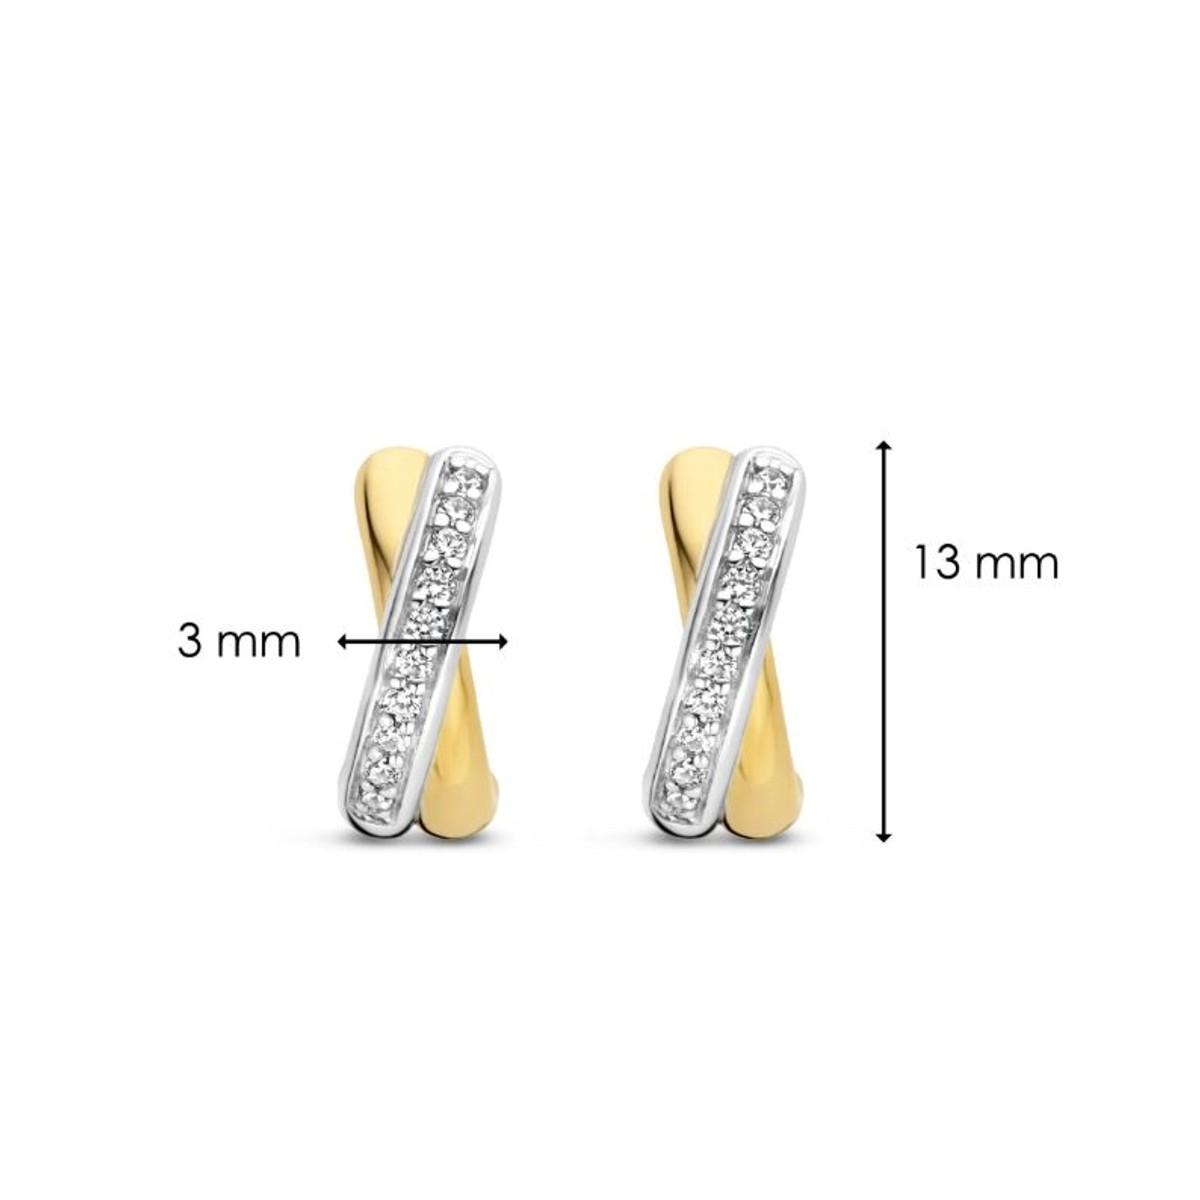 TI SENTO GOLD-PLATED SILVER EARRINGS 7667ZY